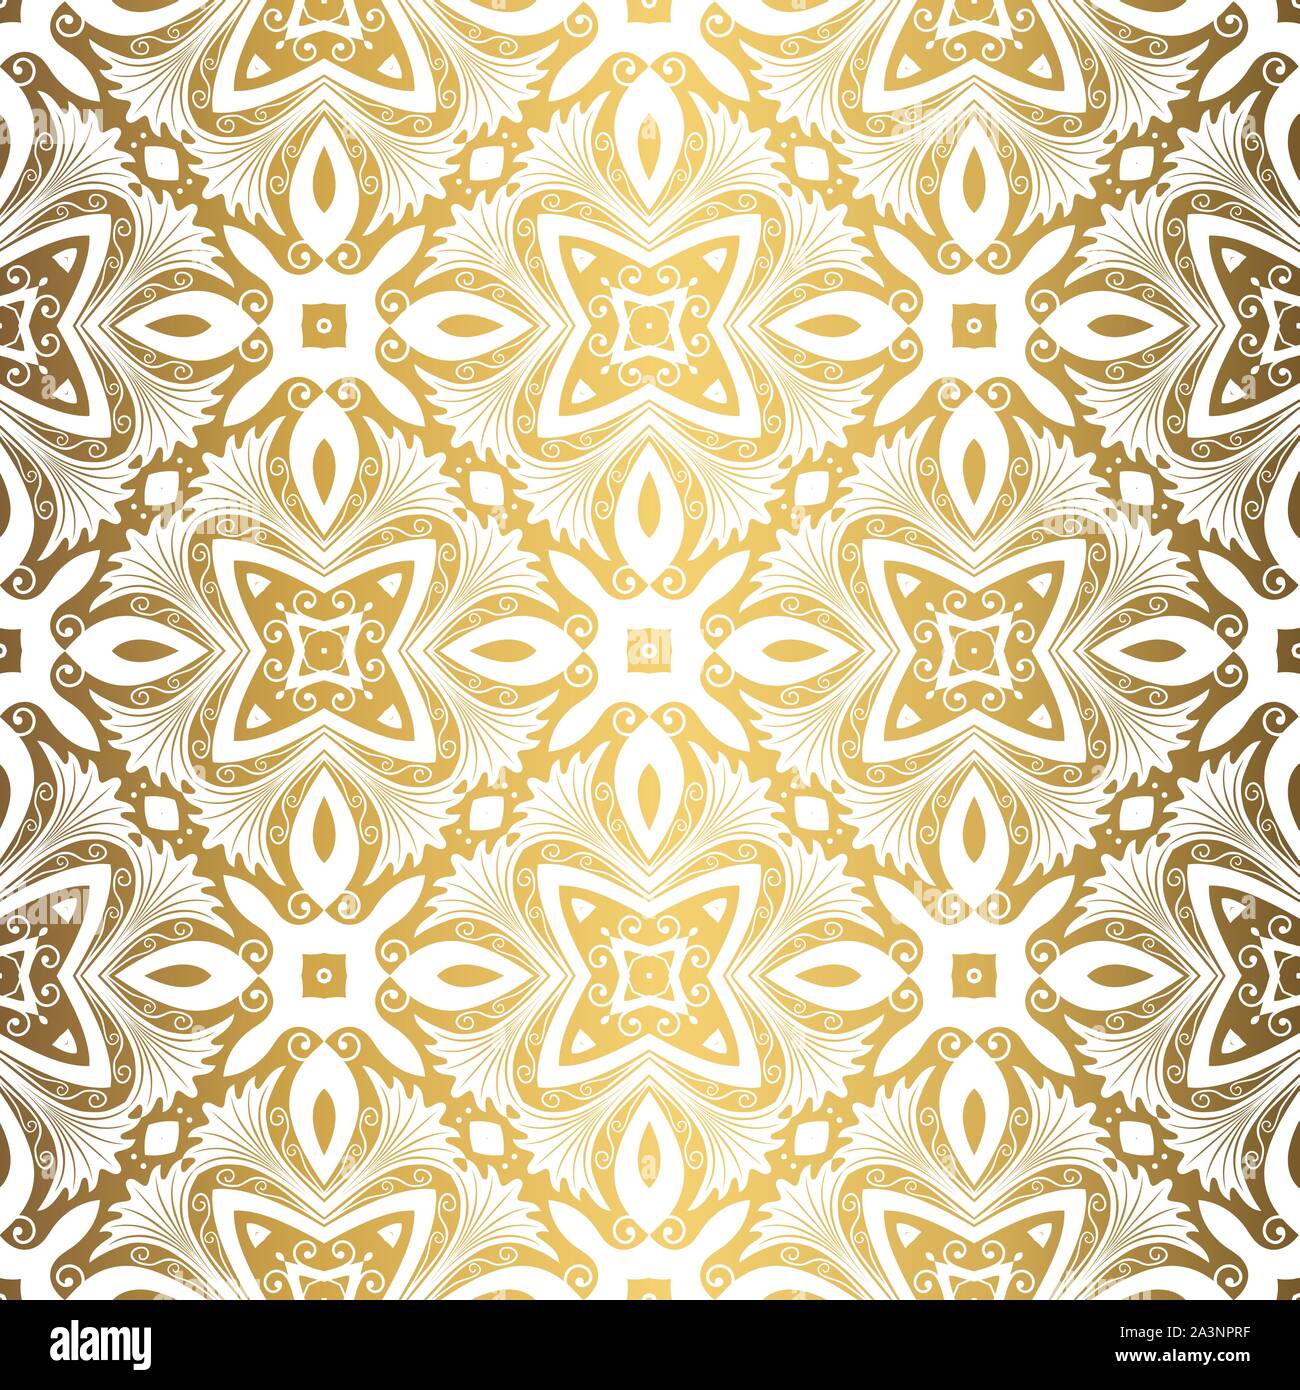 Golden background. Luxury seamless pattern. Elegant weave ornament for wallpaper, fabric, upholstery, bedding, drapery, wedding invitation. Abstract f Stock Vector